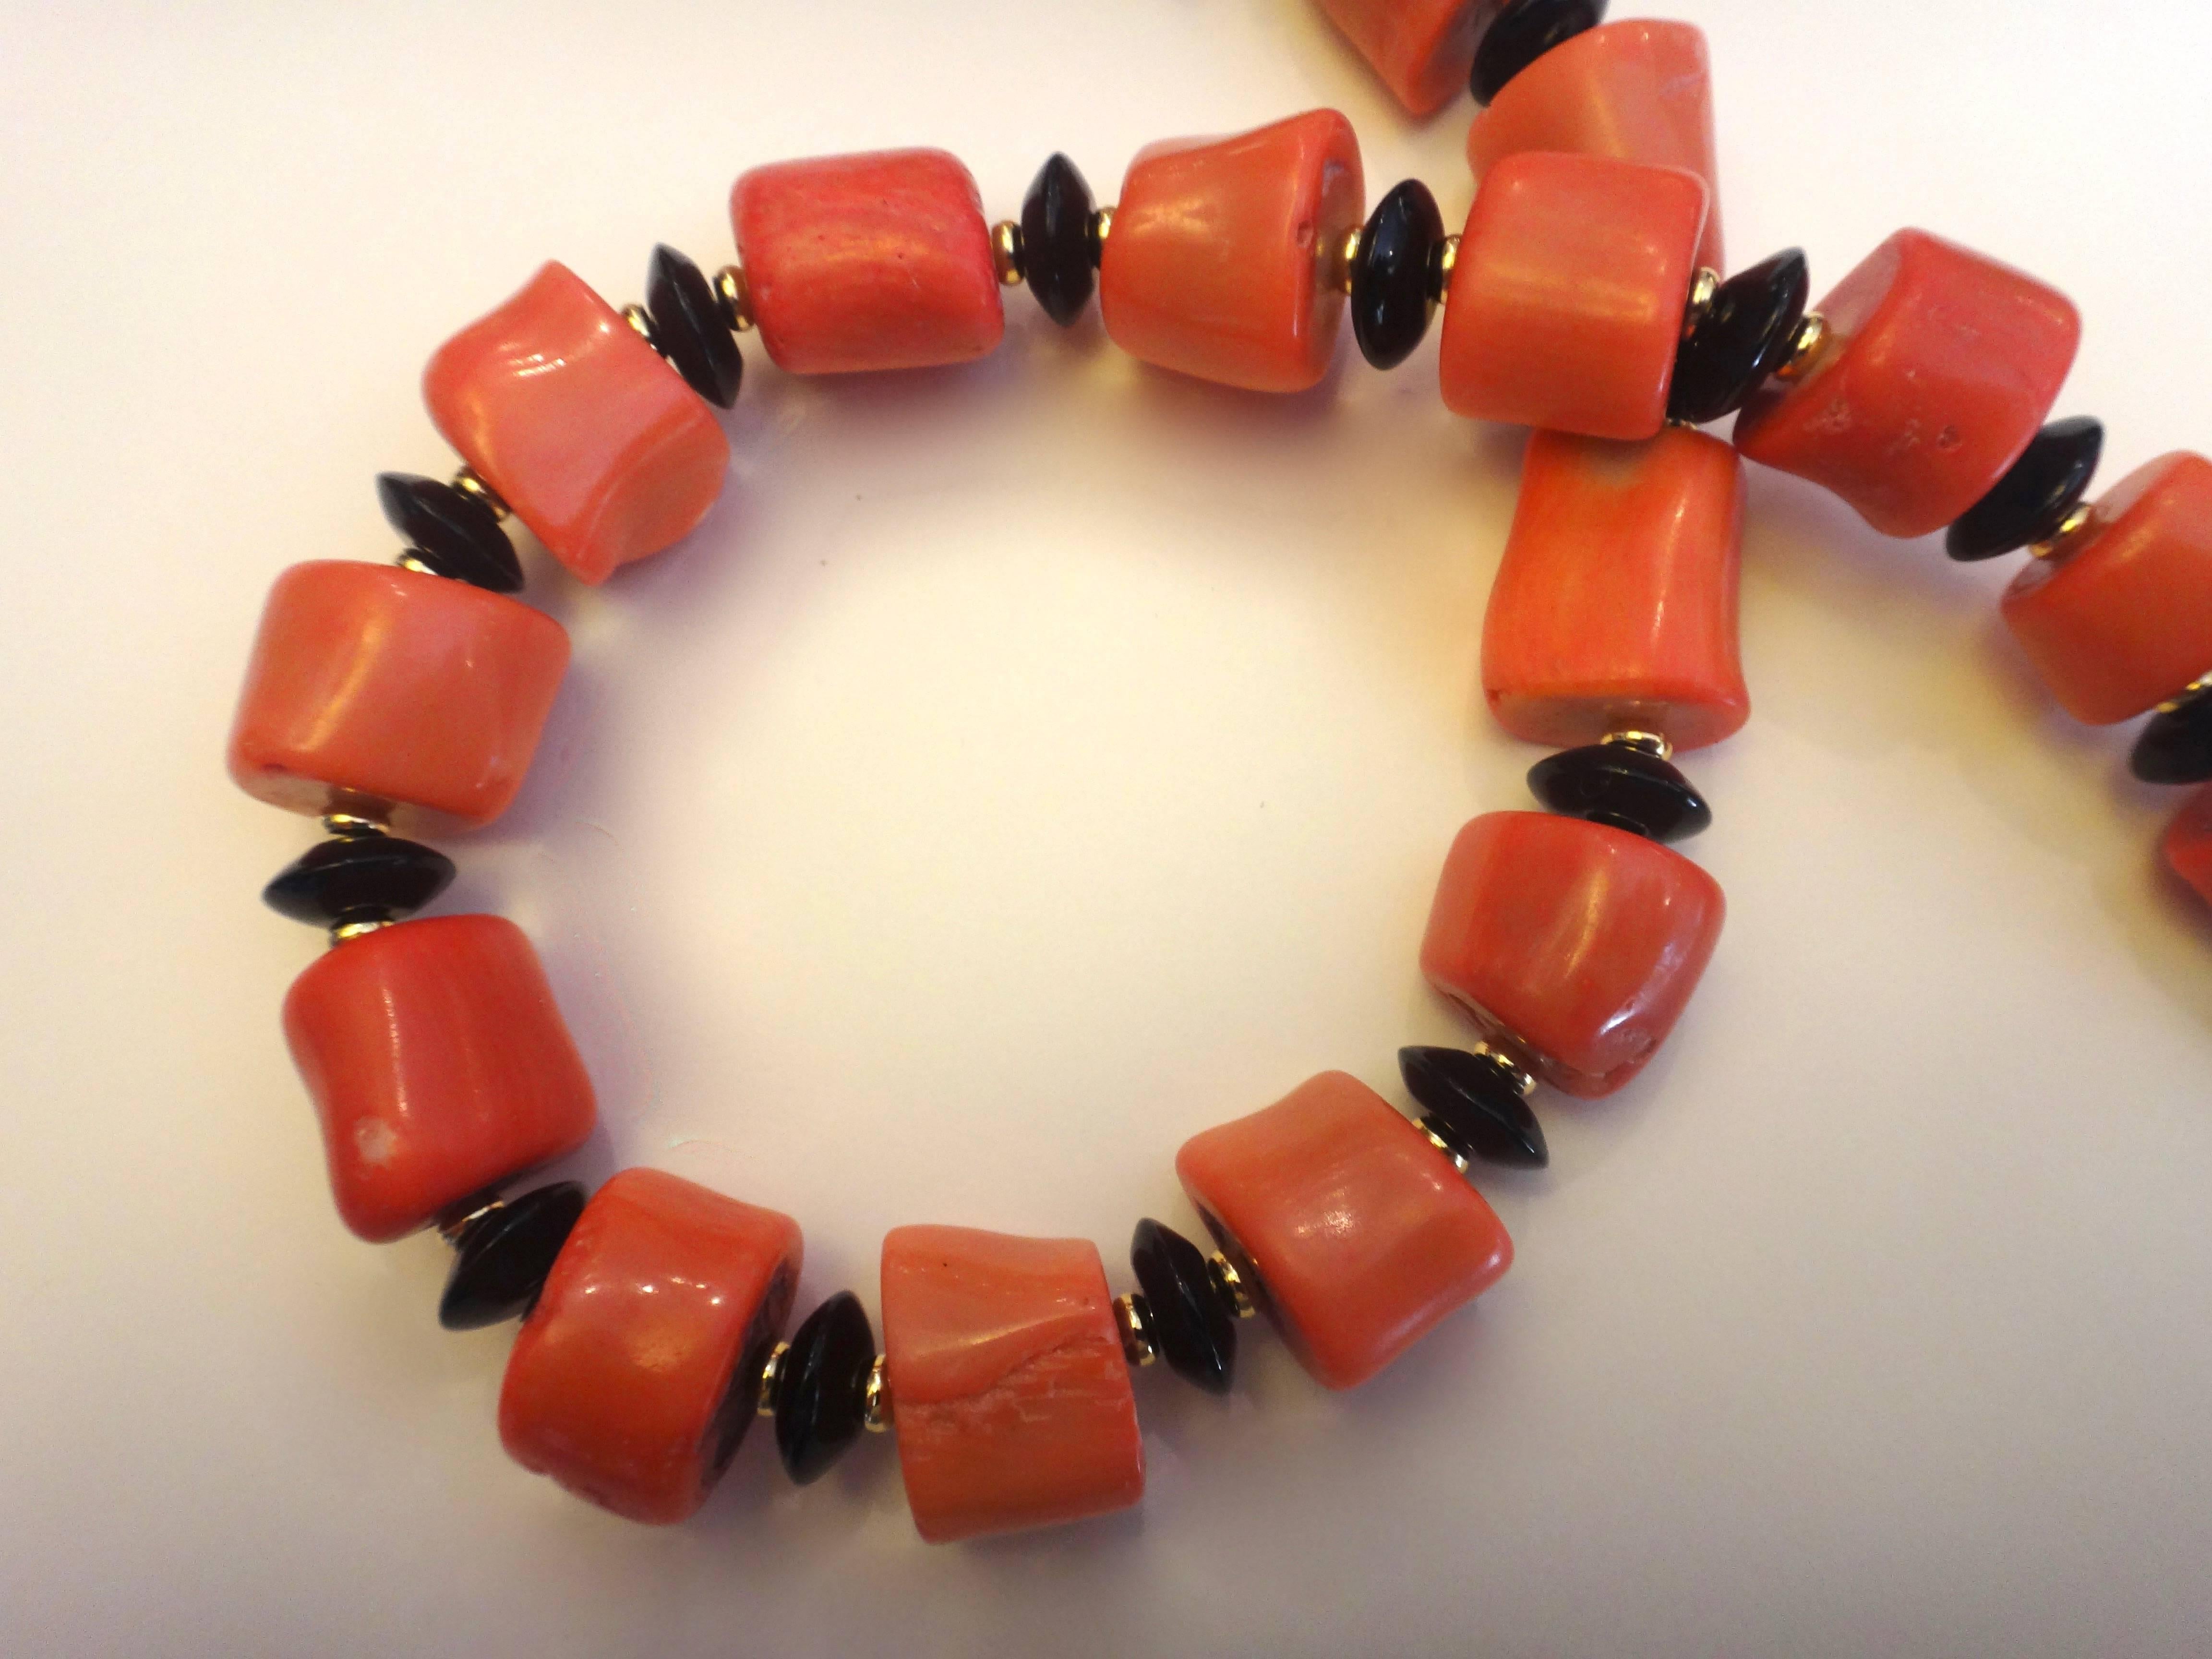 Slices of salmon colored branch color form beads in this nugget necklace.  Complimenting the coral in a very classic color combination, are rondelles of black onyx.  Tiny gold rondelles add interest.  The necklace is finished with a vermeil hook